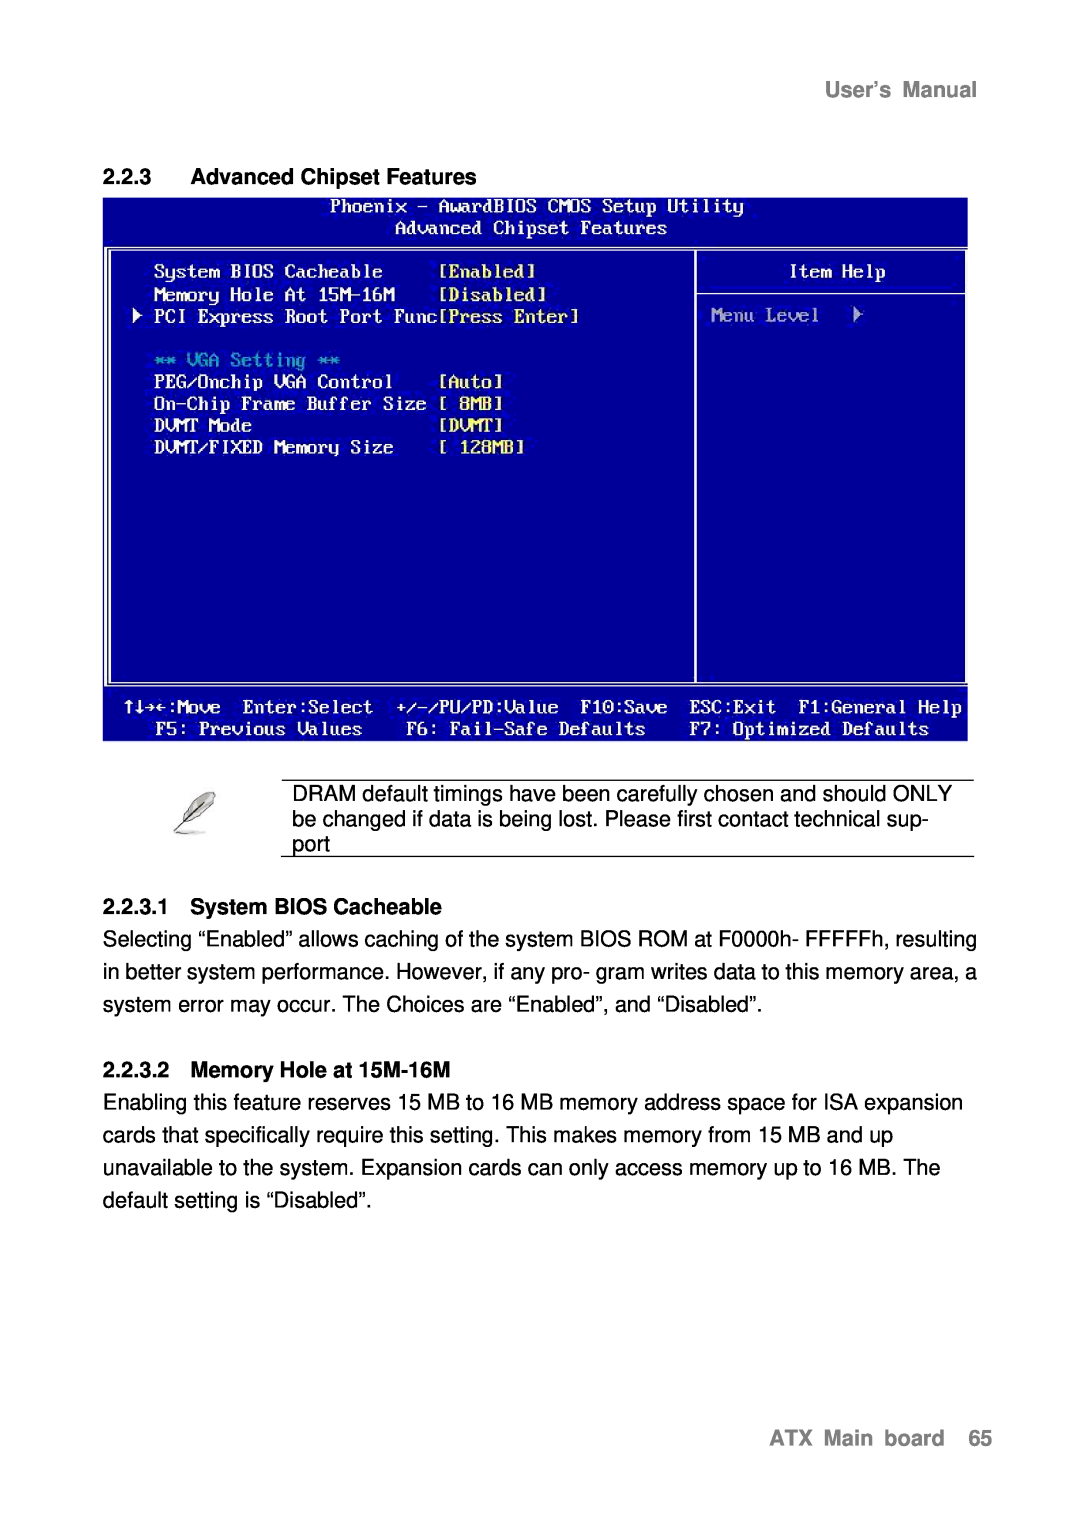 Intel AX965Q Advanced Chipset Features, System BIOS Cacheable, Memory Hole at 15M-16M, User’s Manual, ATX Main board 